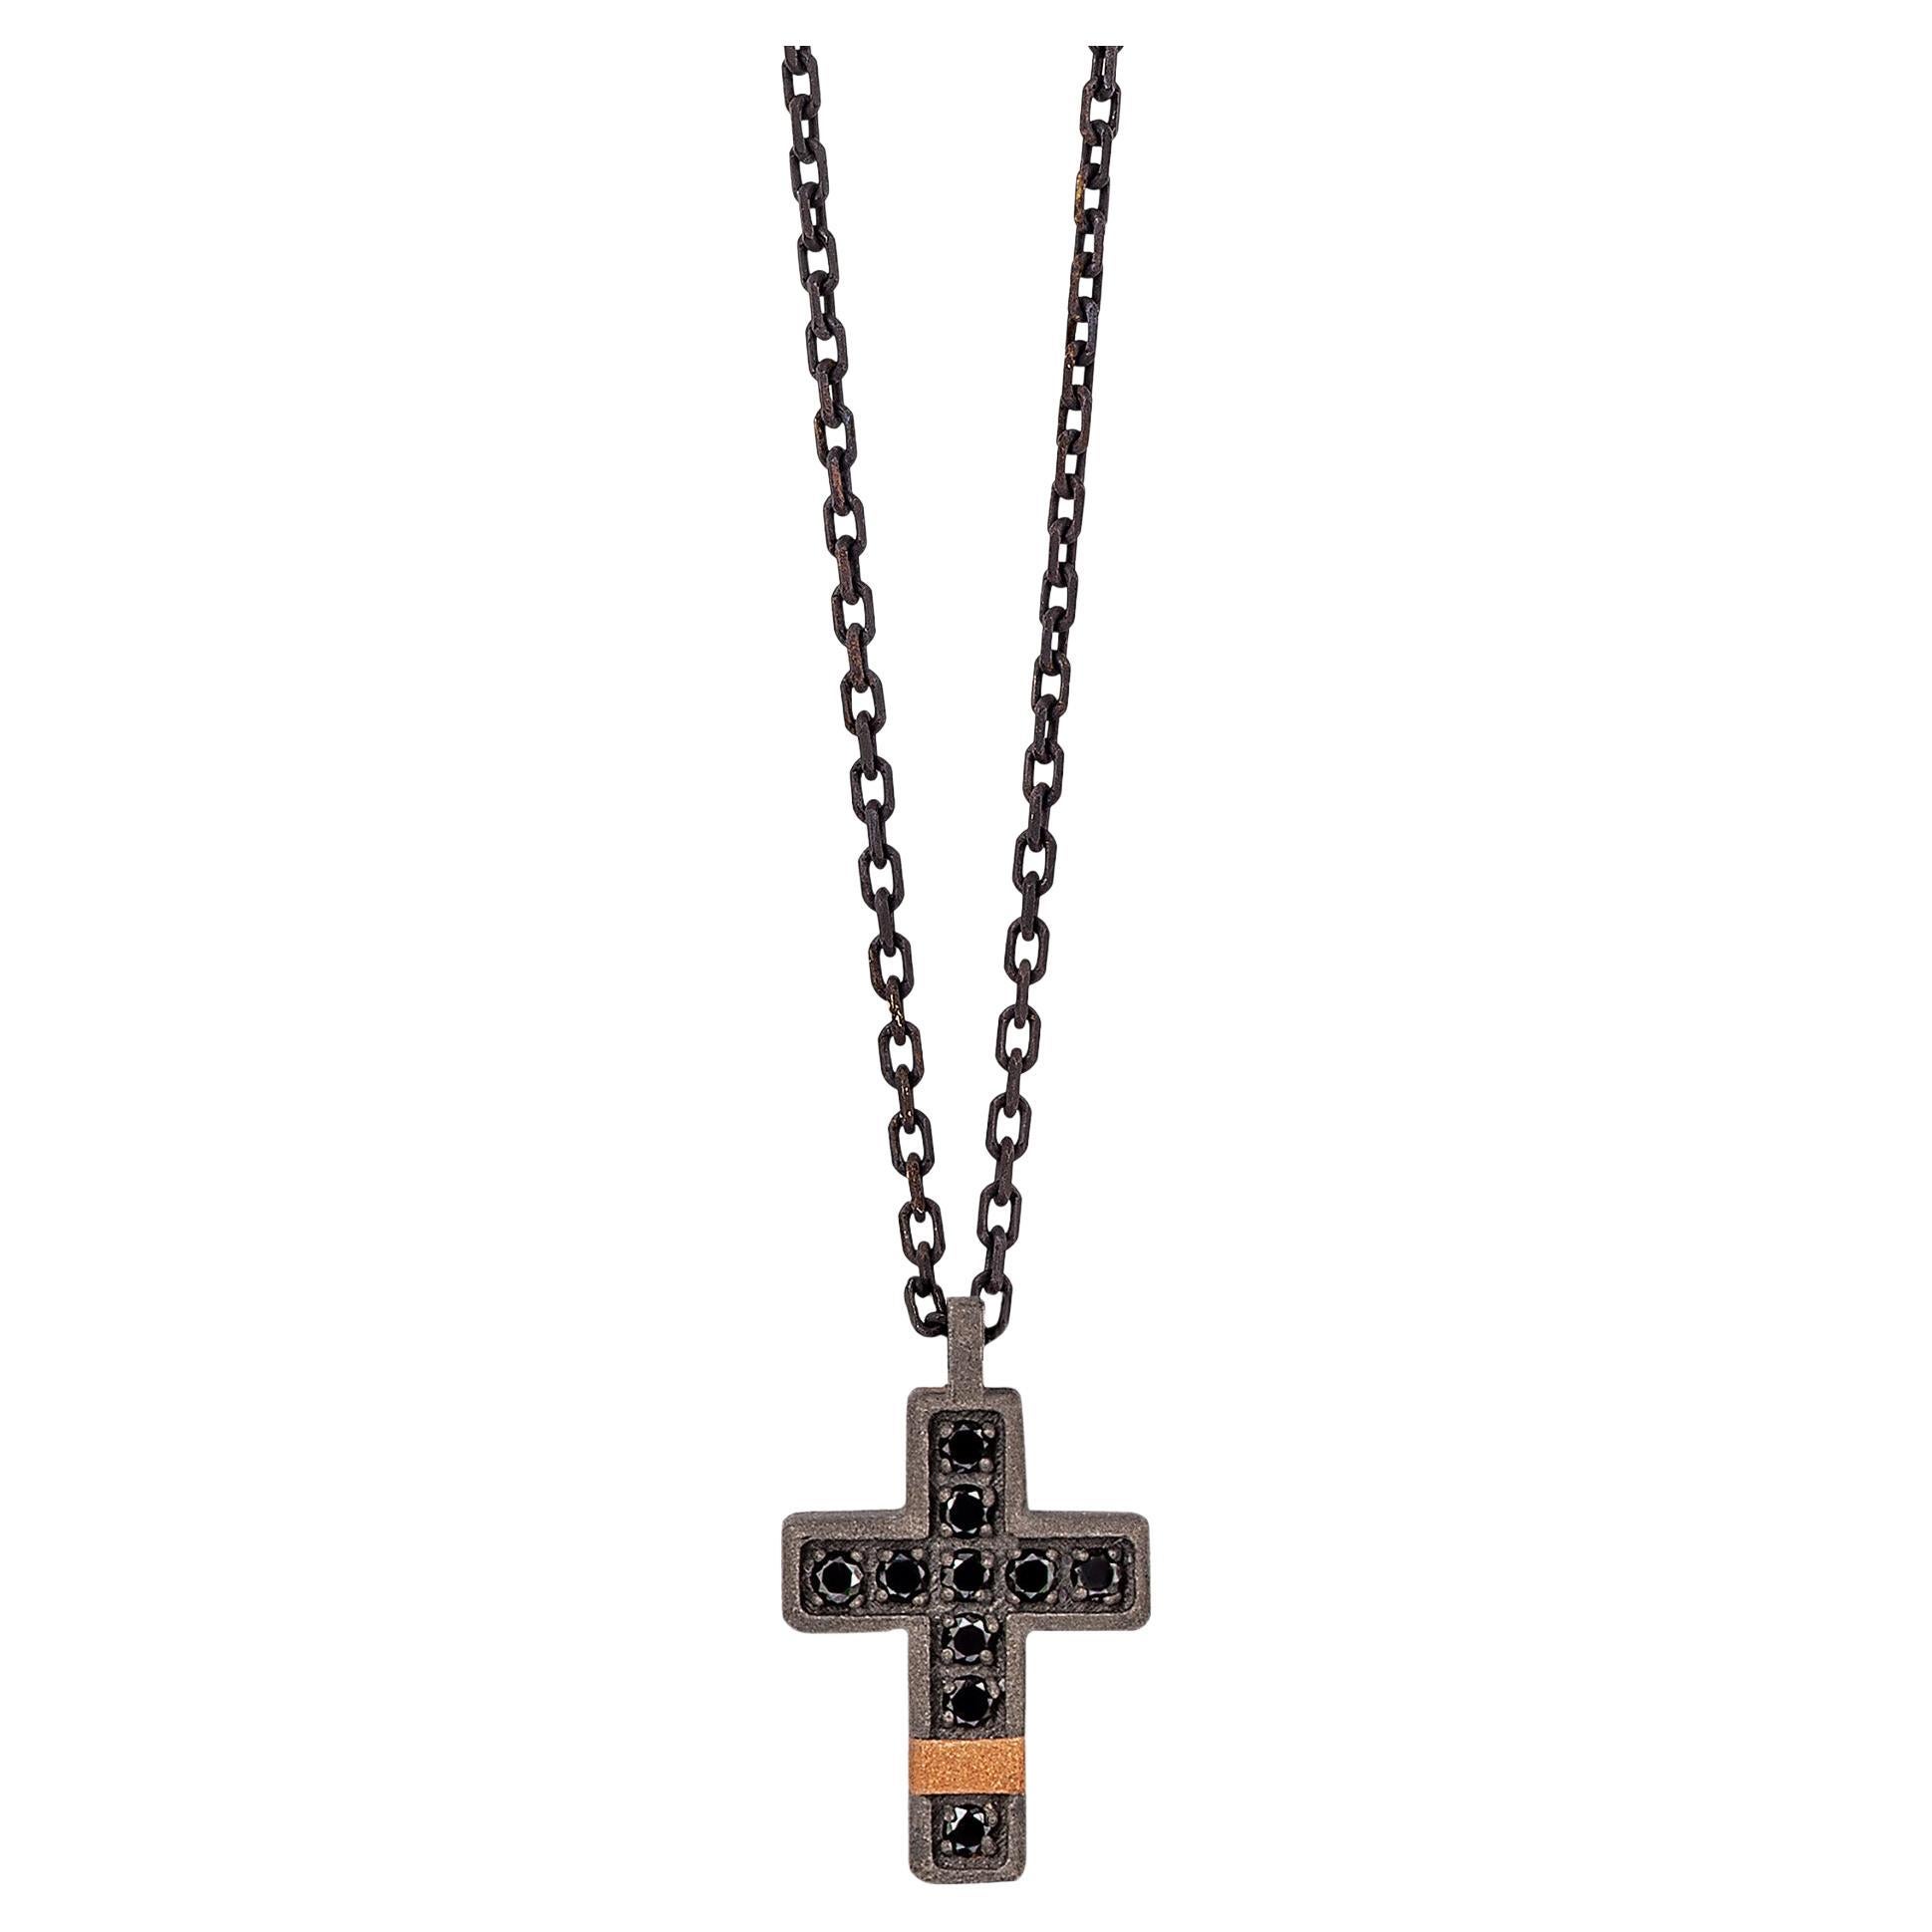 Men's Necklace with Small Cross in Titaniu, 18KT & 9KT Red Gold, Black Diamonds For Sale